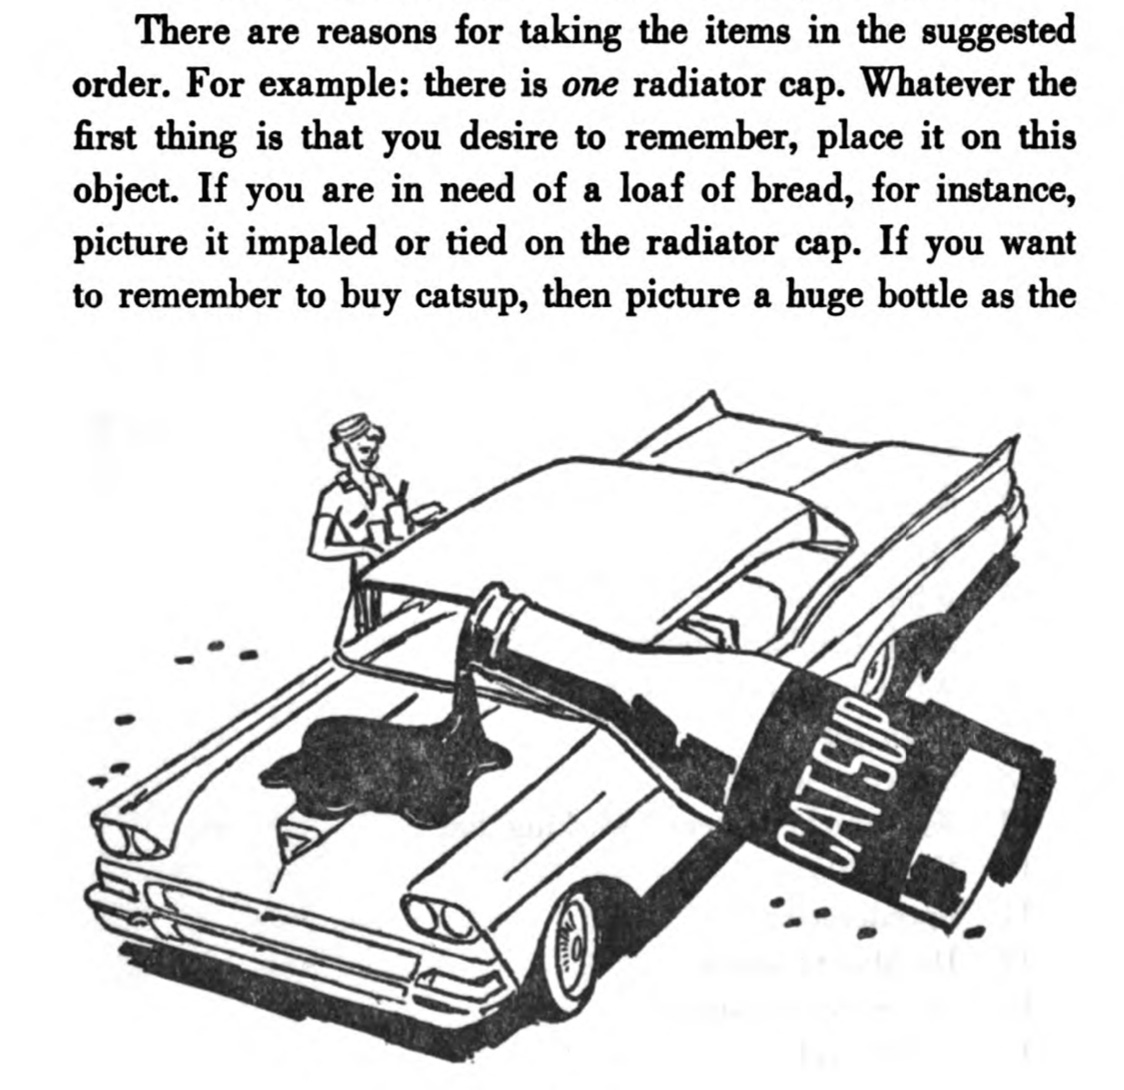 The image contains the following text quote in addition to a diagram “There are reasons for taking the items in the suggested order. For example: there is one radiator cap. Whatever the first thing is that you desire to remember, place it on this object. If you are in need of a loaf of bread, for instance, picture it impaled or tied on the radiator cap. If you want to remember to buy catsup, then picture a huge bottle as the…” Beneath this text is a 1950s-style vehicle with a massive bottle of ketchup spilling its contents all over the car’s hood. 